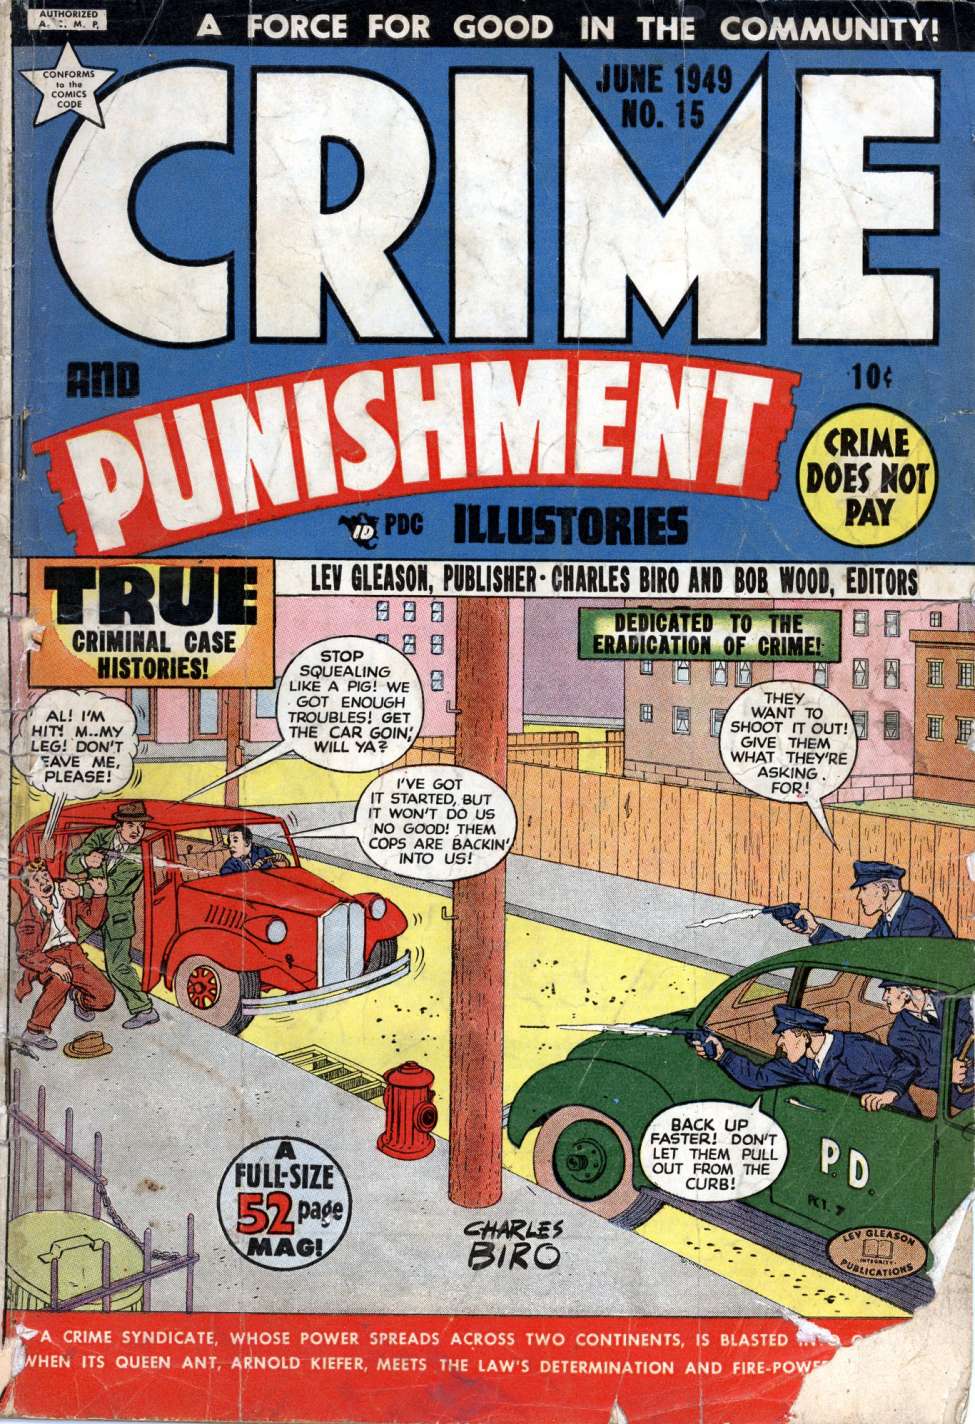 Comic Book Cover For Crime and Punishment 15 (paper/4digital)